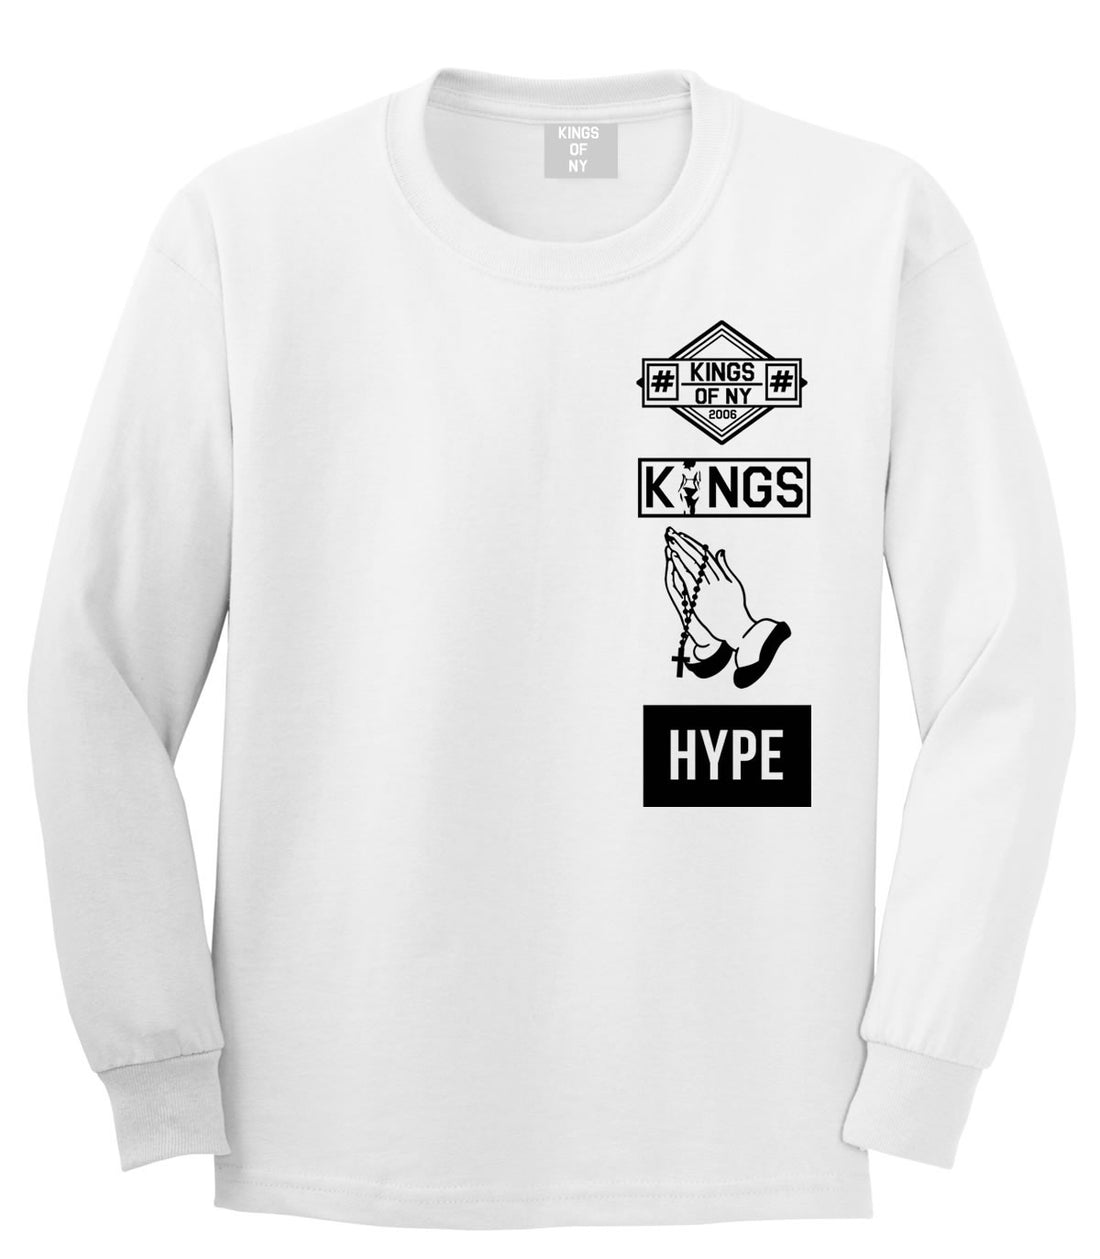 Prayer Hands Hype Left Logos Long Sleeve T-Shirt in White By Kings Of NY